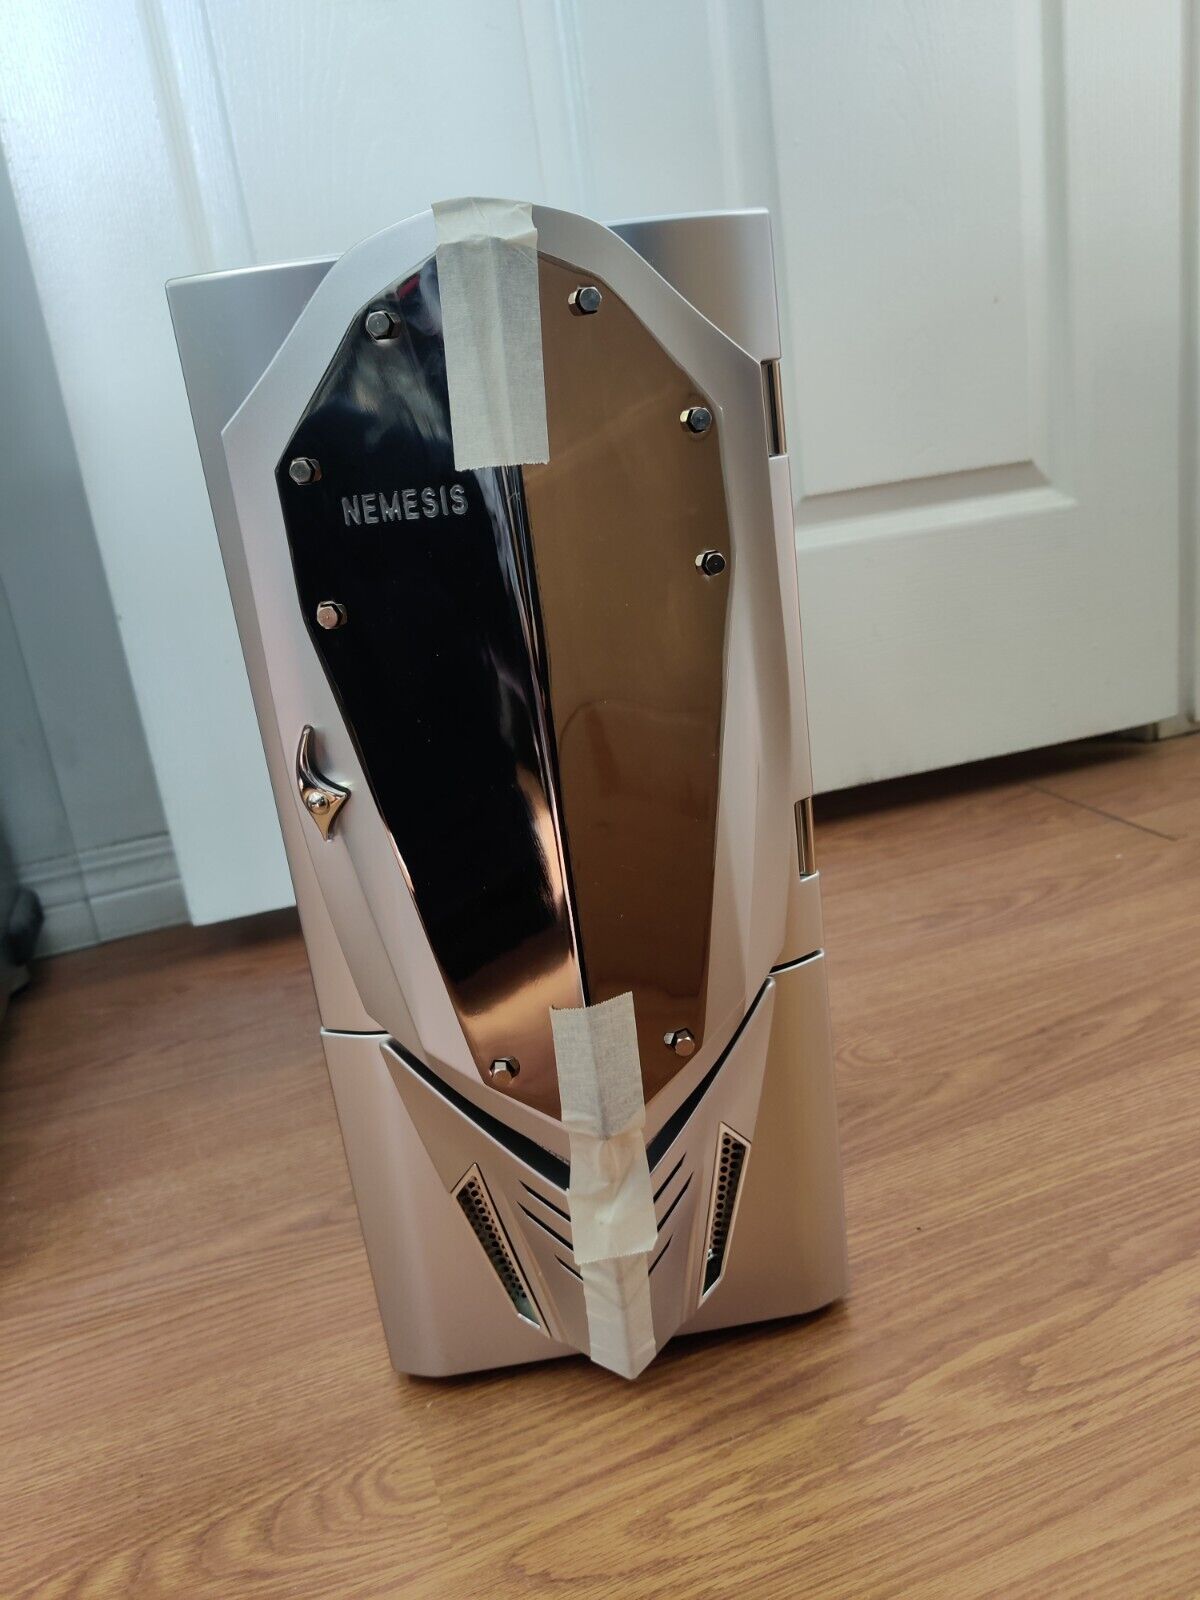 Brand New NZXT Nemesis  Silver  Chassis for retro computer build